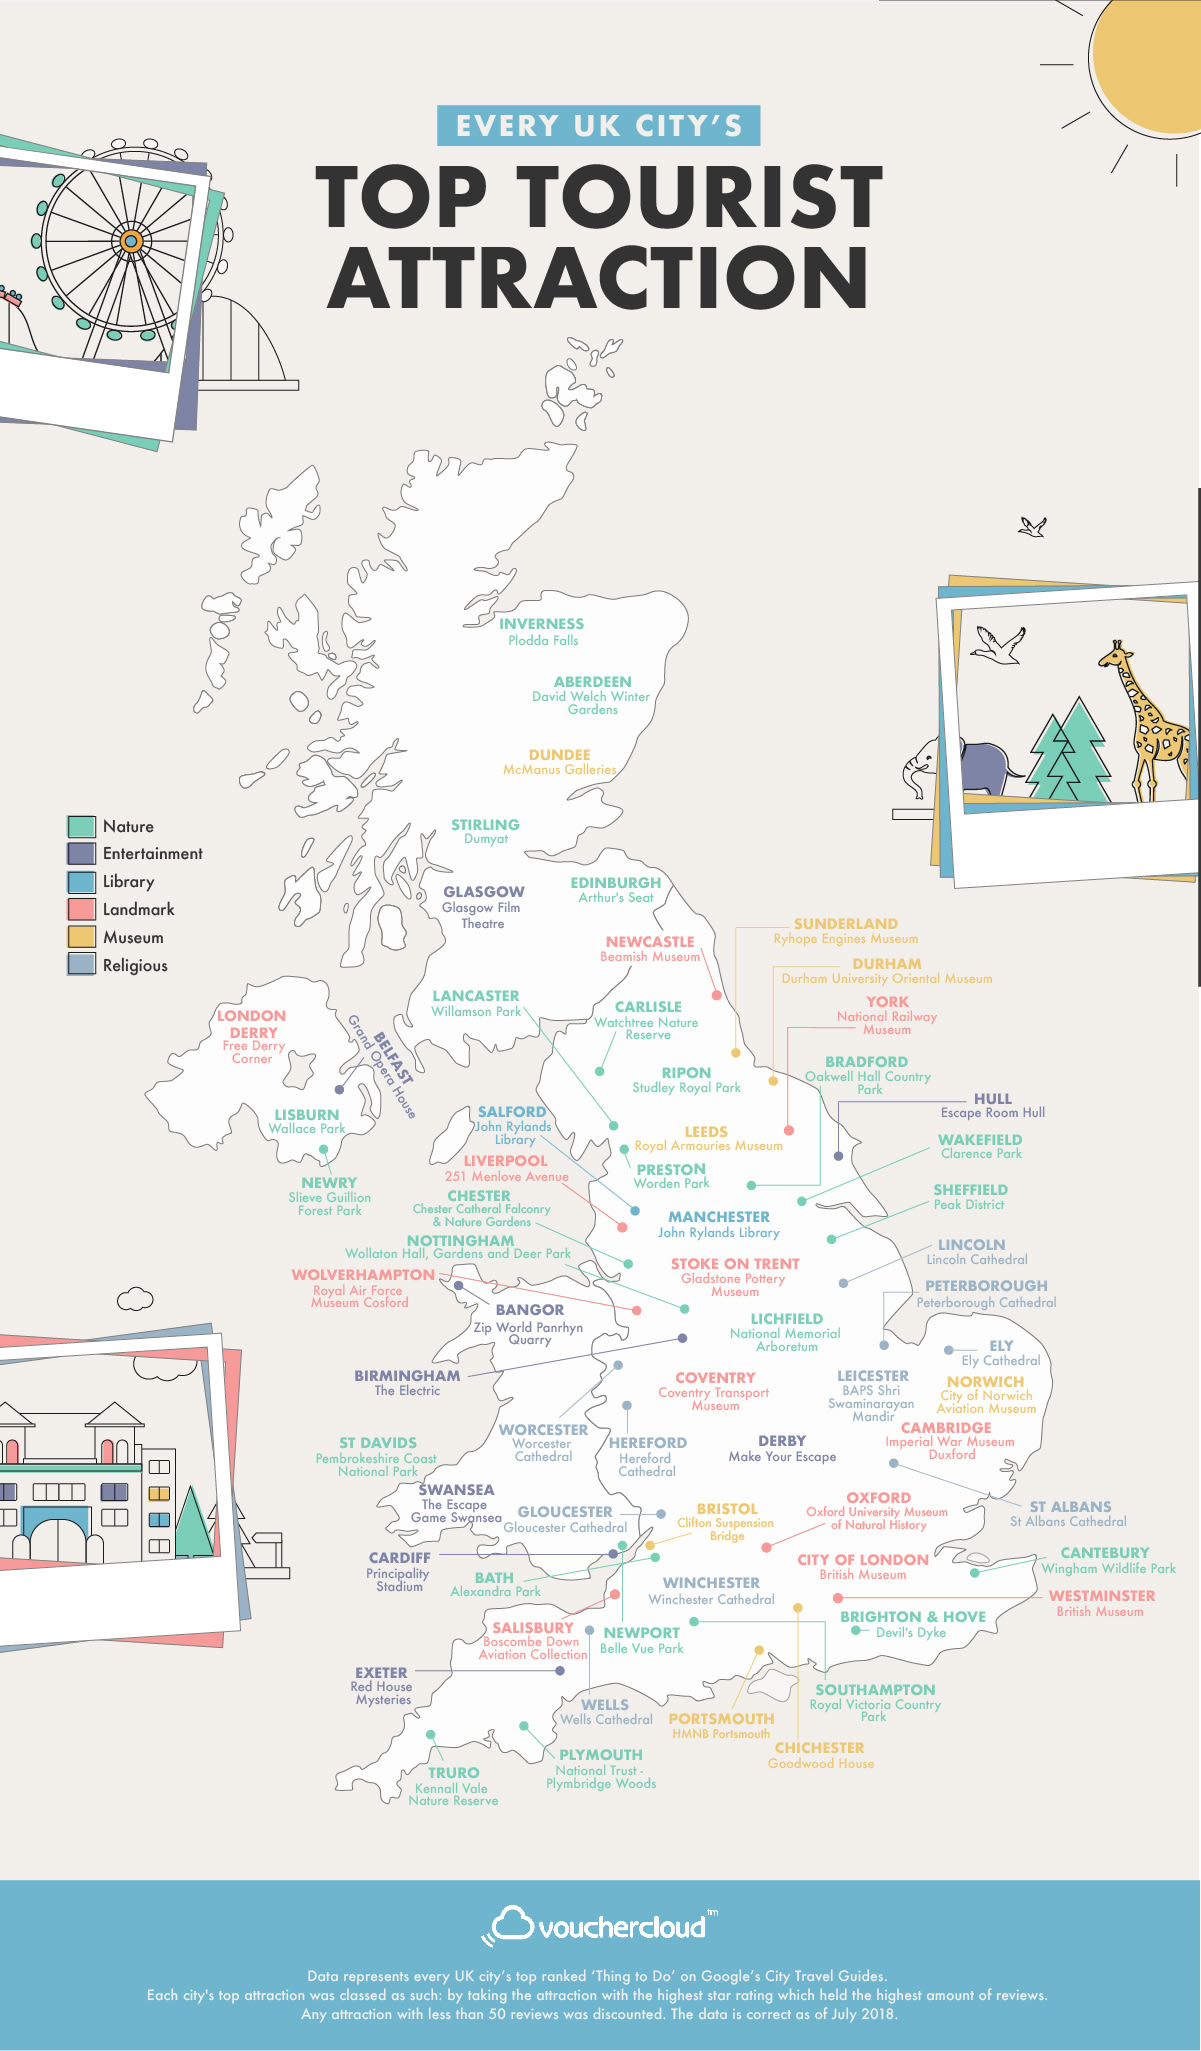 Every UK City's Top Tourist Attraction 